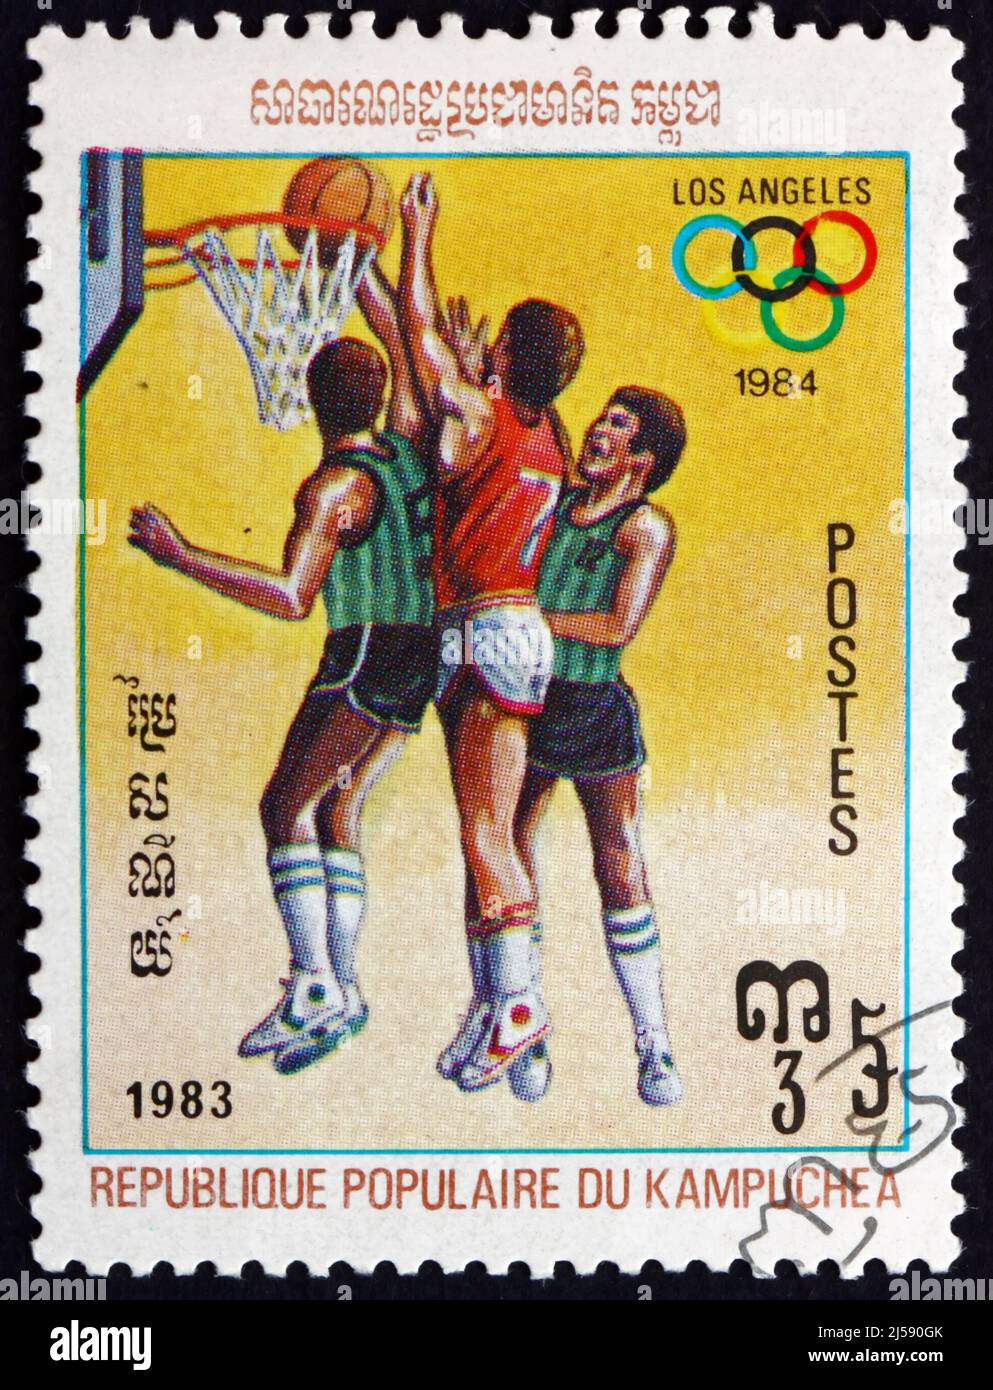 CAMBODIA - CIRCA 1983: a stamp printed in Cambodia shows Basketball, 1984 Summer Olympic Games, Los Angeles, circa 1983 Stock Photo